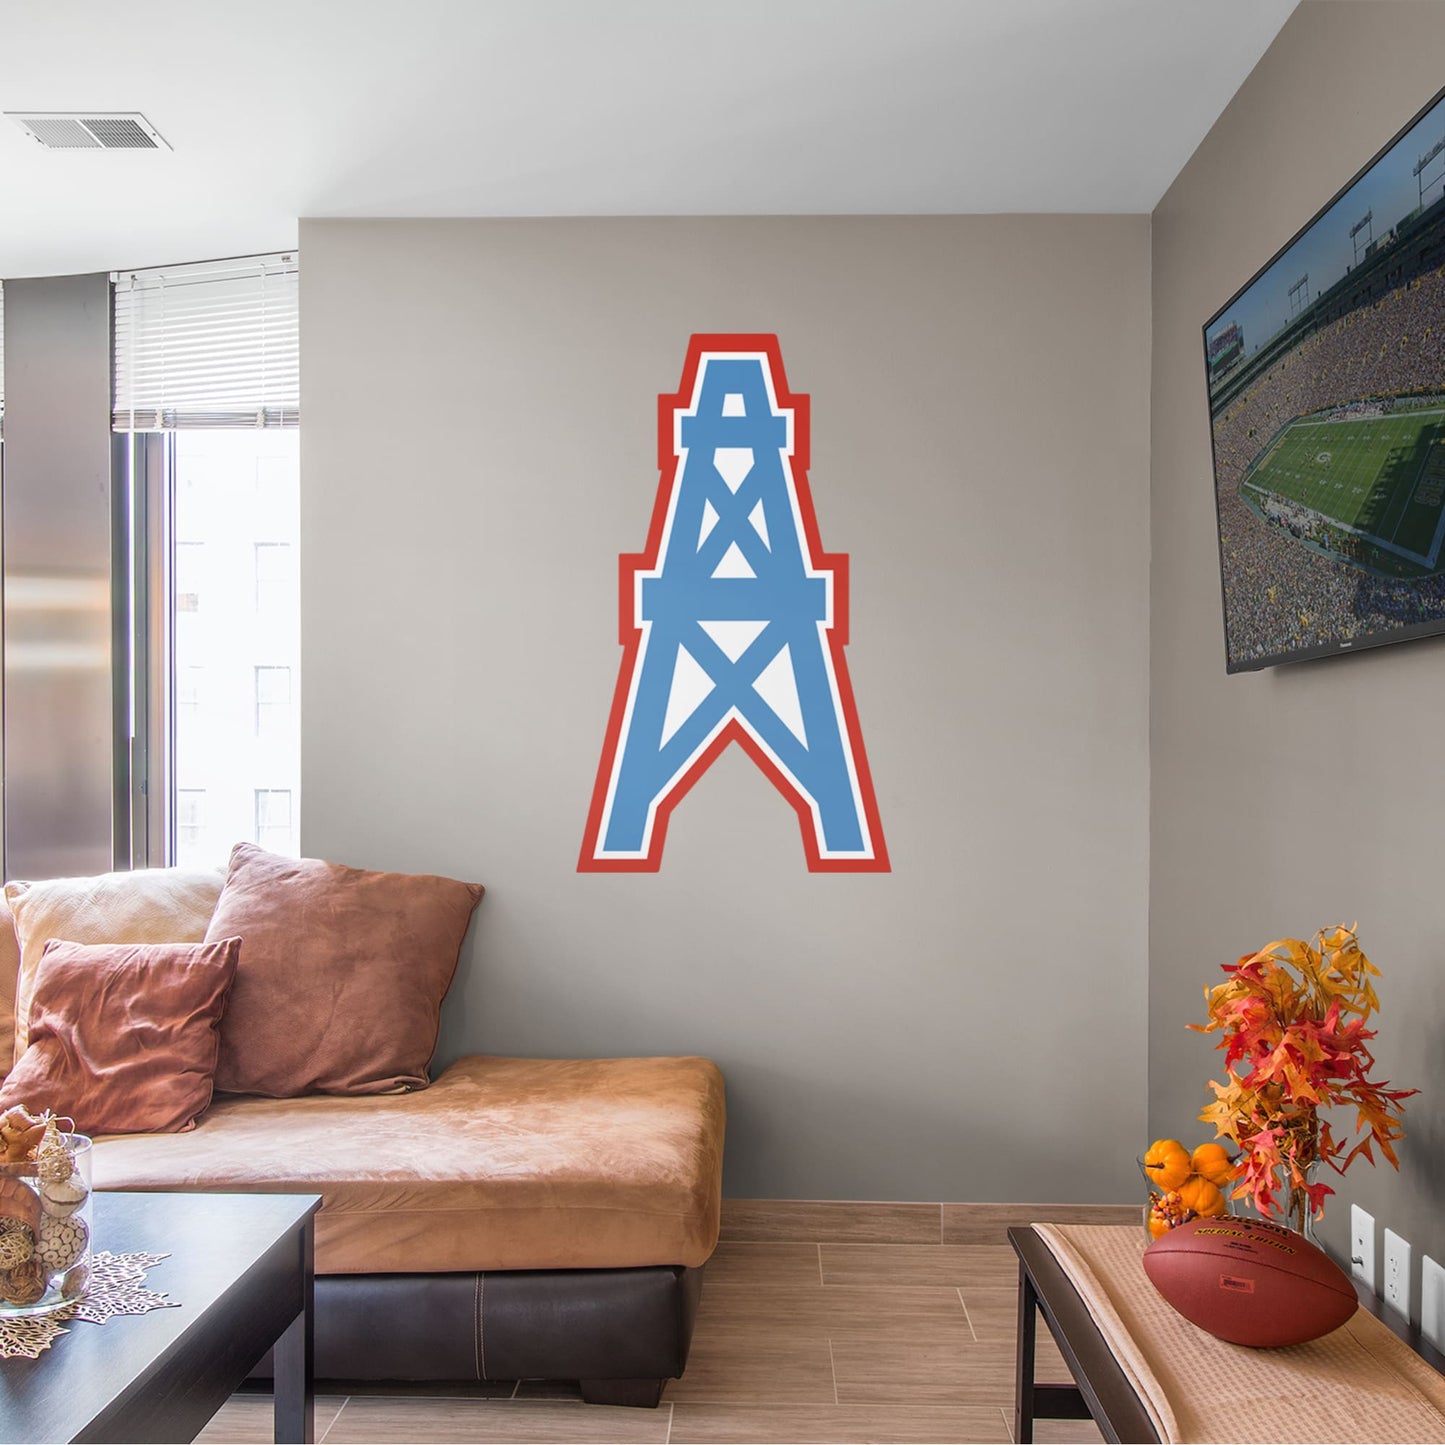 Houston Oilers: Original AFL Logo - Officially Licensed NFL Removable Wall Decal